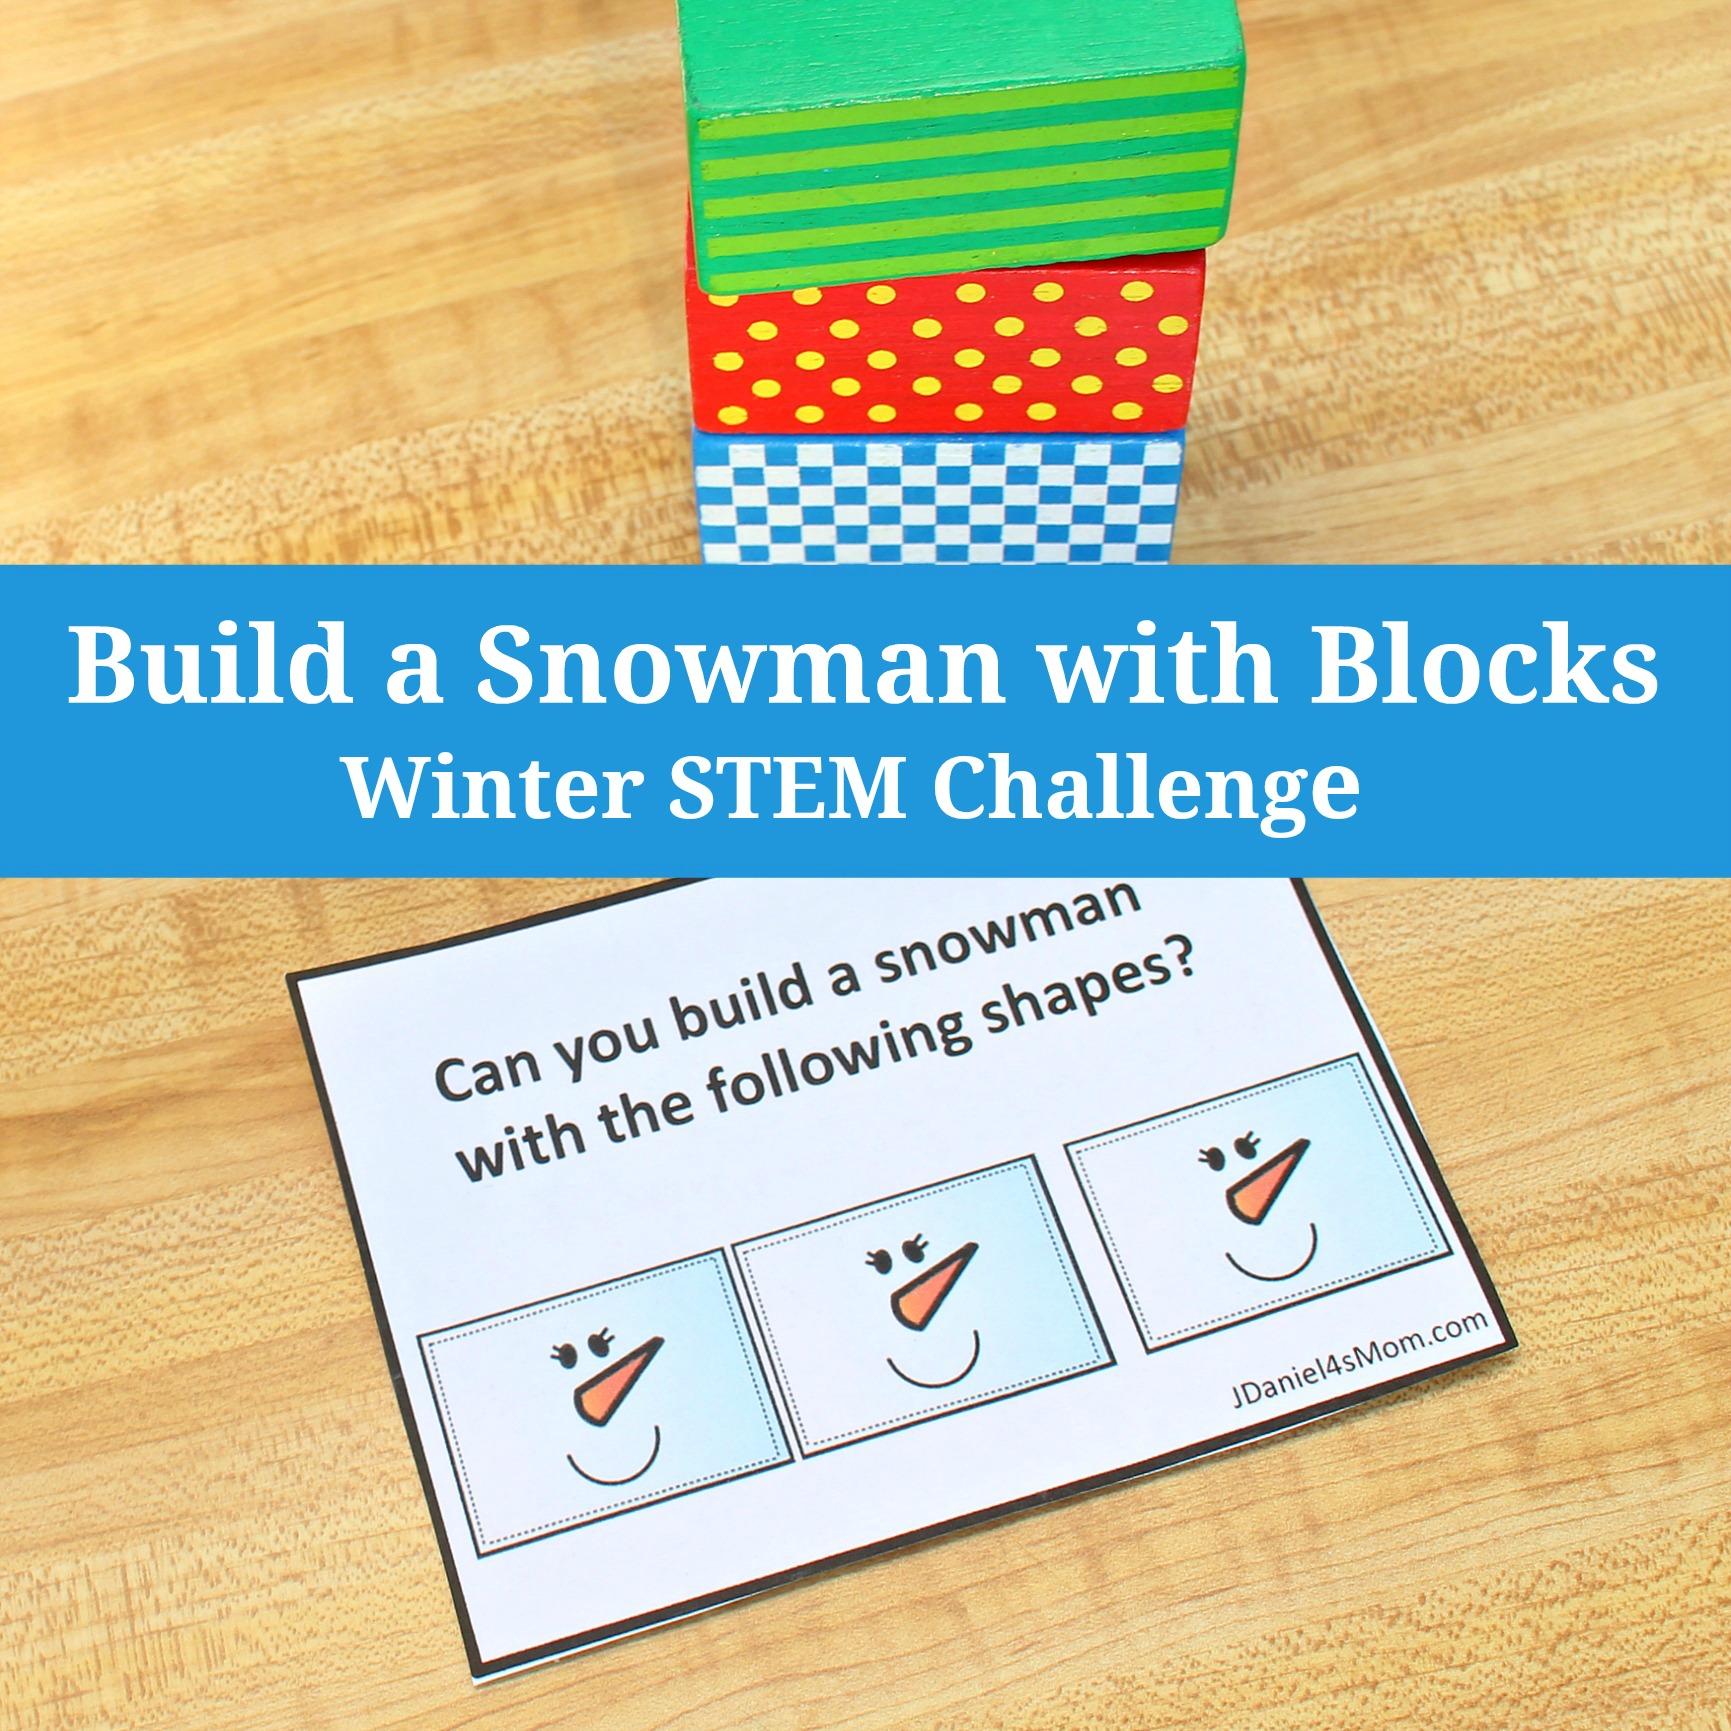 Build a Snowman with Blocks Winter STEM Challenge with Free Printable Cards